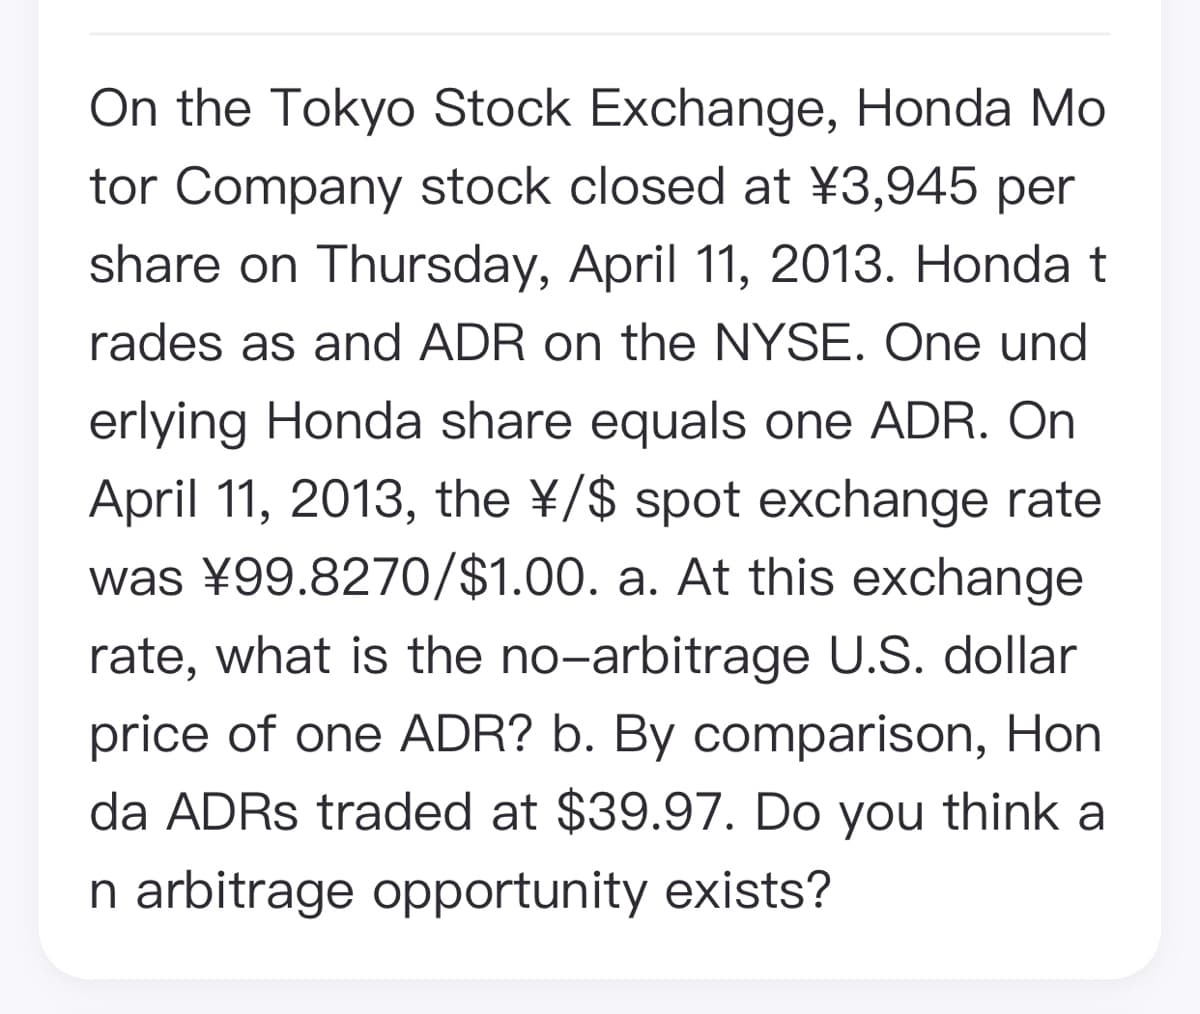 On the Tokyo Stock Exchange, Honda Mo
tor Company stock closed at ¥3,945 per
share on Thursday, April 11, 2013. Honda t
rades as and ADR on the NYSE. One und
erlying Honda share equals one ADR. On
April 11, 2013, the ¥/$ spot exchange rate
was ¥99.8270/$1.00. a. At this exchange
rate, what is the no-arbitrage U.S. dollar
price of one ADR? b. By comparison, Hon
da ADRS traded at $39.97. Do you think a
n arbitrage opportunity exists?
